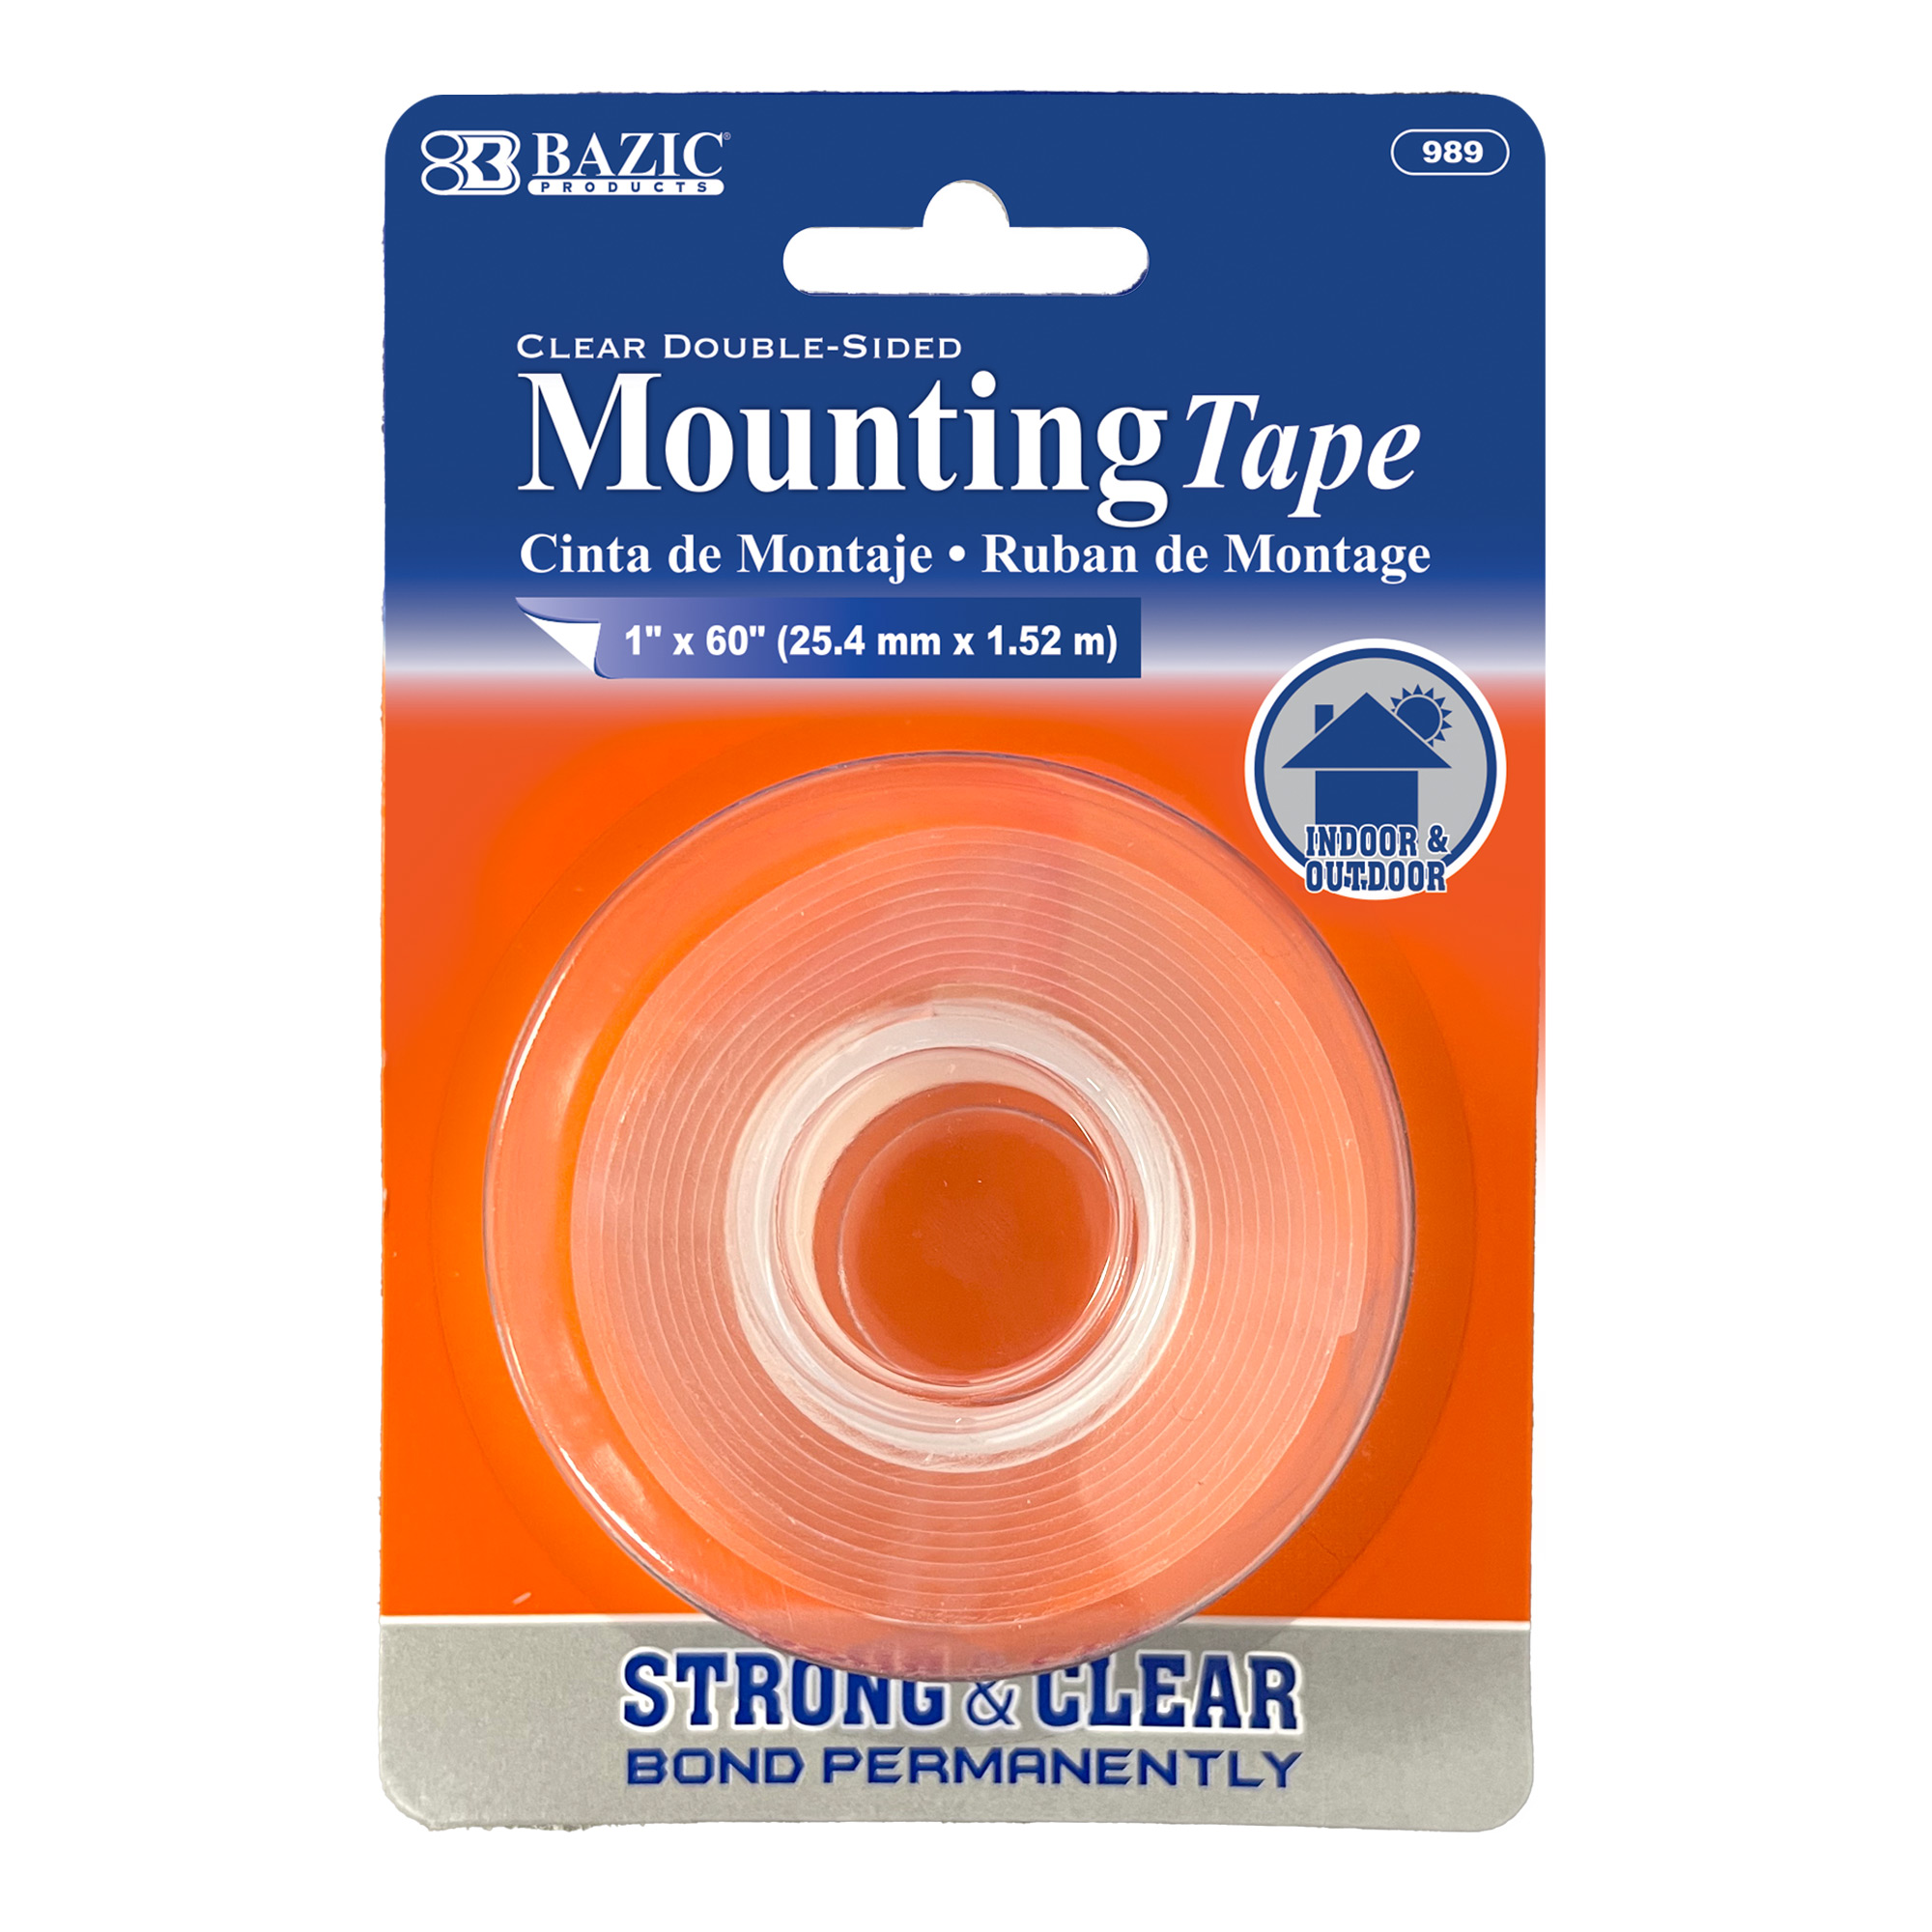 Bonding Forever Super Clear Gel Double Sided Tape, Foam Tape, Double  Sided Adhesive Tape, Mounting Tape